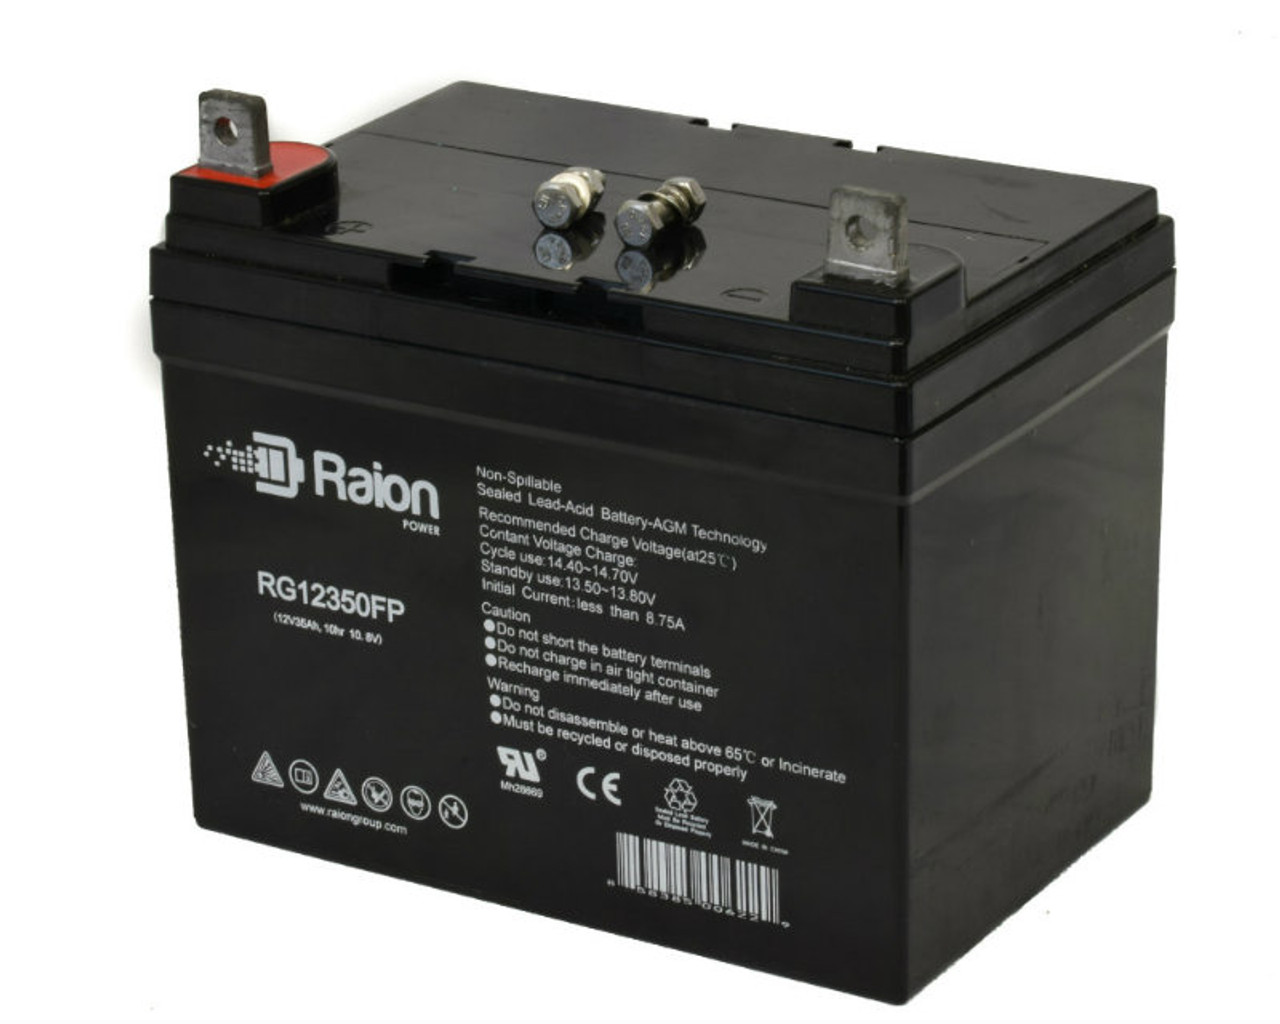 Raion Power Replacement 12V 35Ah Battery for J.I. Case & Case IH 446 - 1 Pack